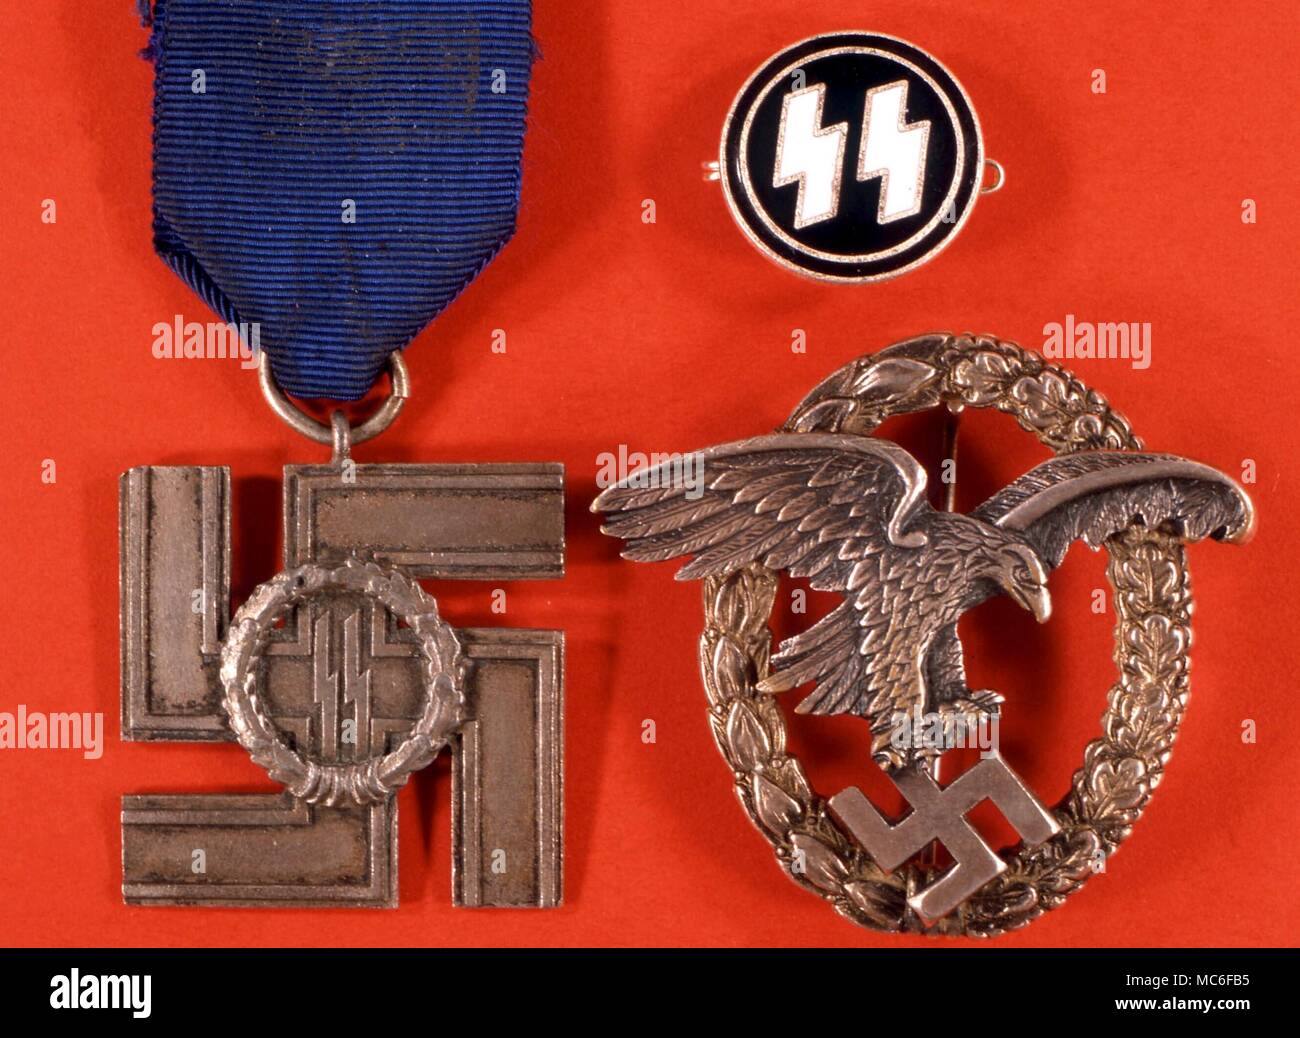 SWASTIKA Swastika in the talons of an eagle. Nazi service medal - Observer's Badge. Swastika on cross, with SS (runic) symbol: SS Service Medal, First and Second Class. Small SS members badge Stock Photo